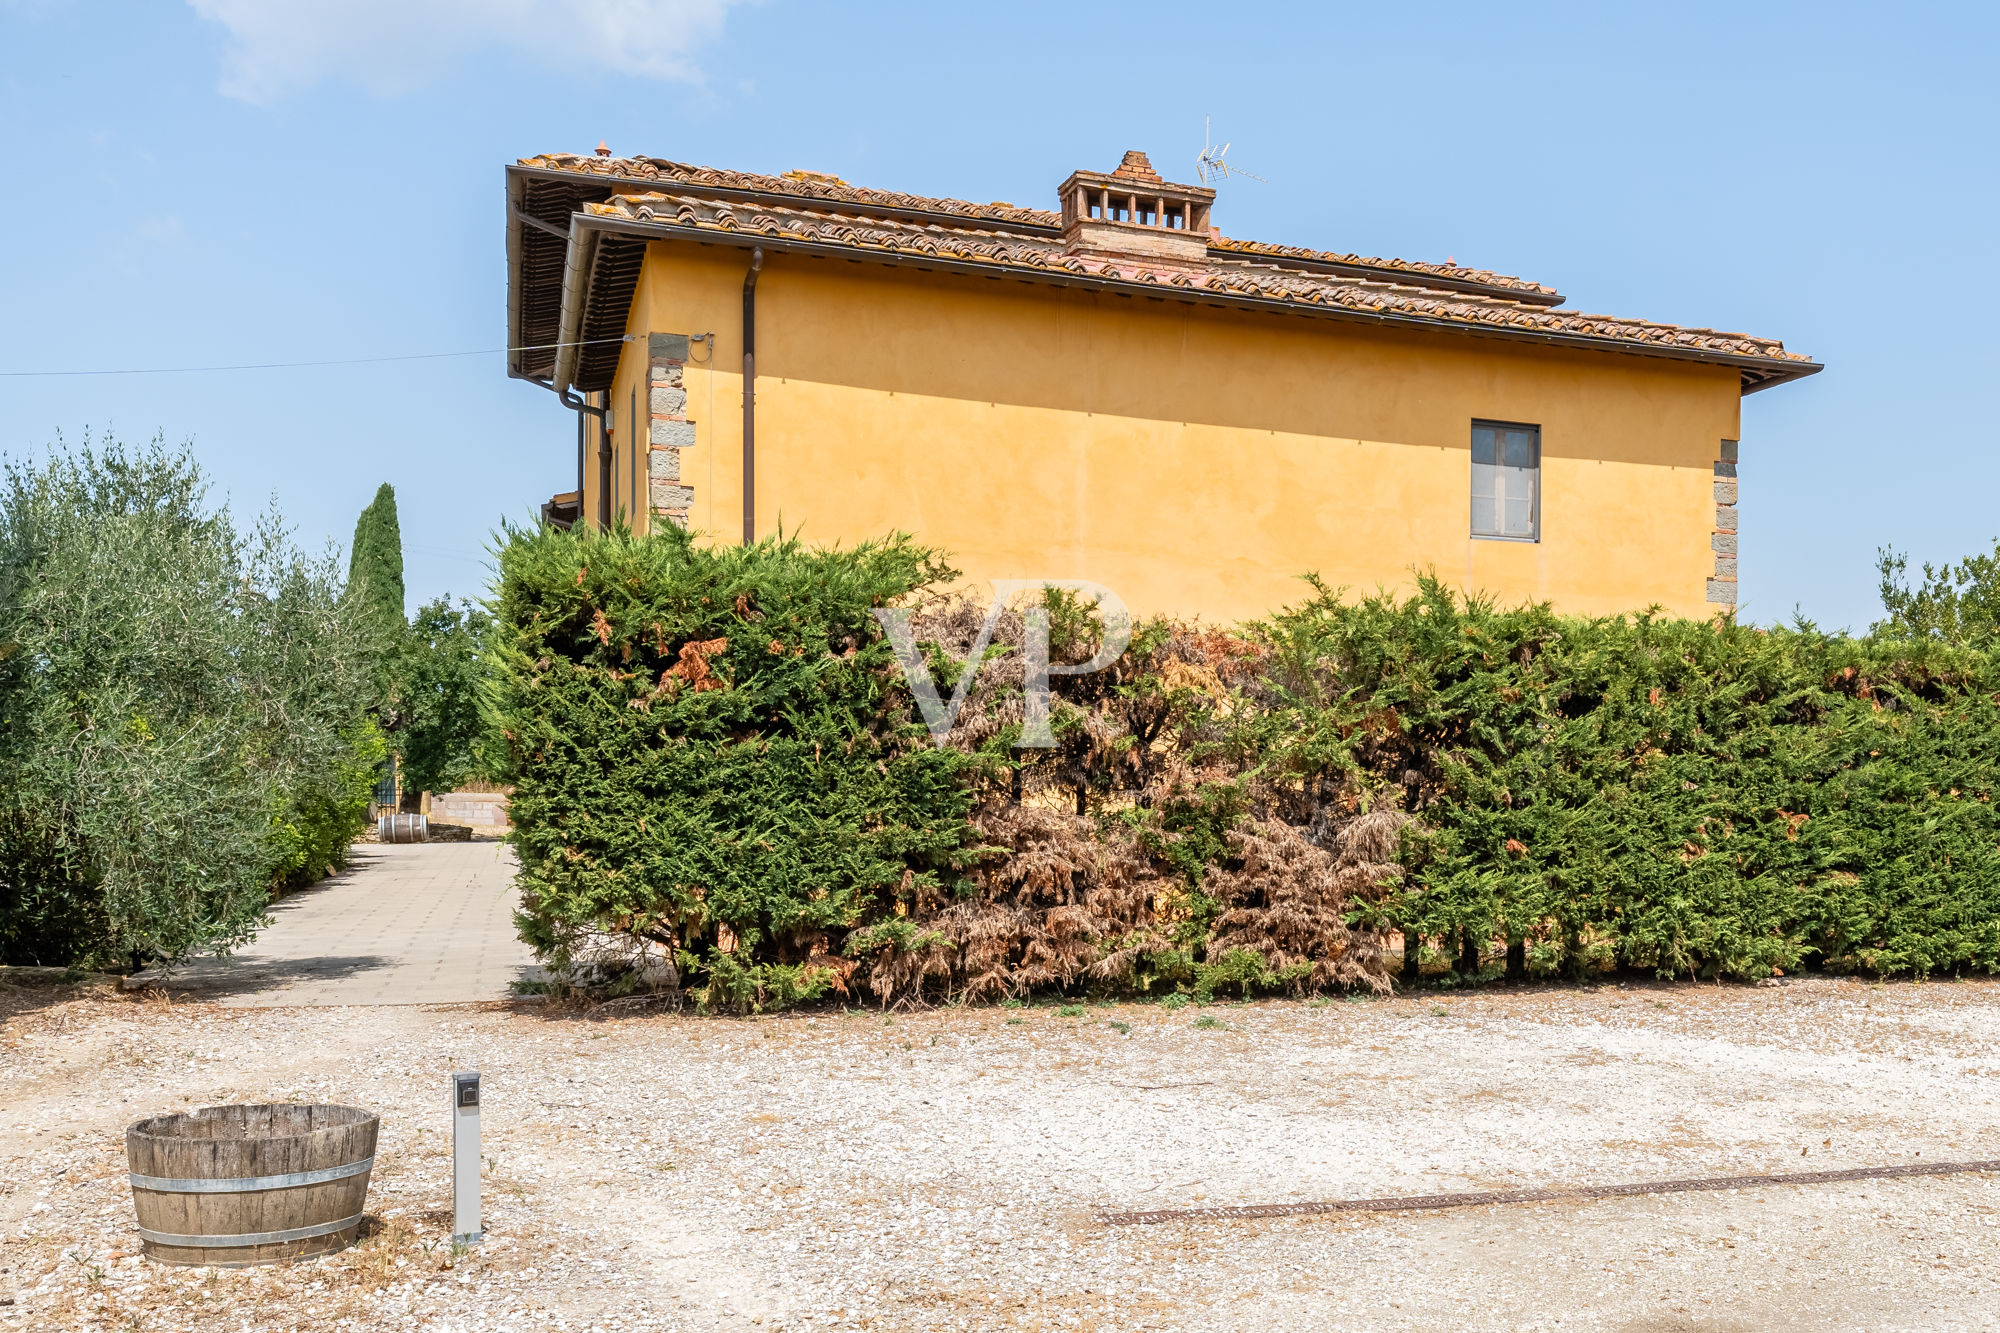 Prestigious country house in the heart of Tuscany with panoramic terrace and wine cellar